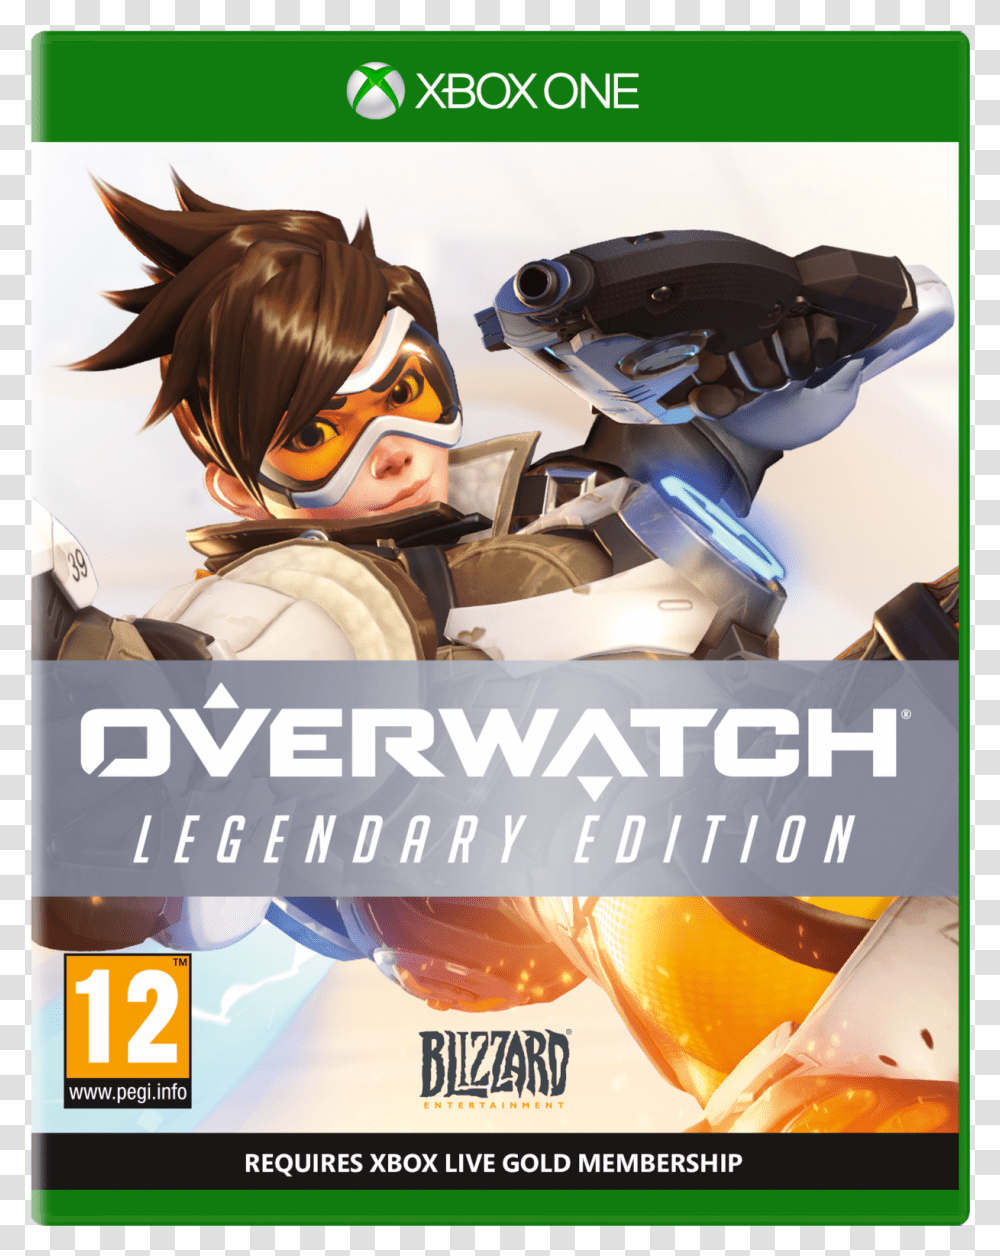 Overwatch Legendary Edition Xbox One, Poster, Advertisement Transparent Png